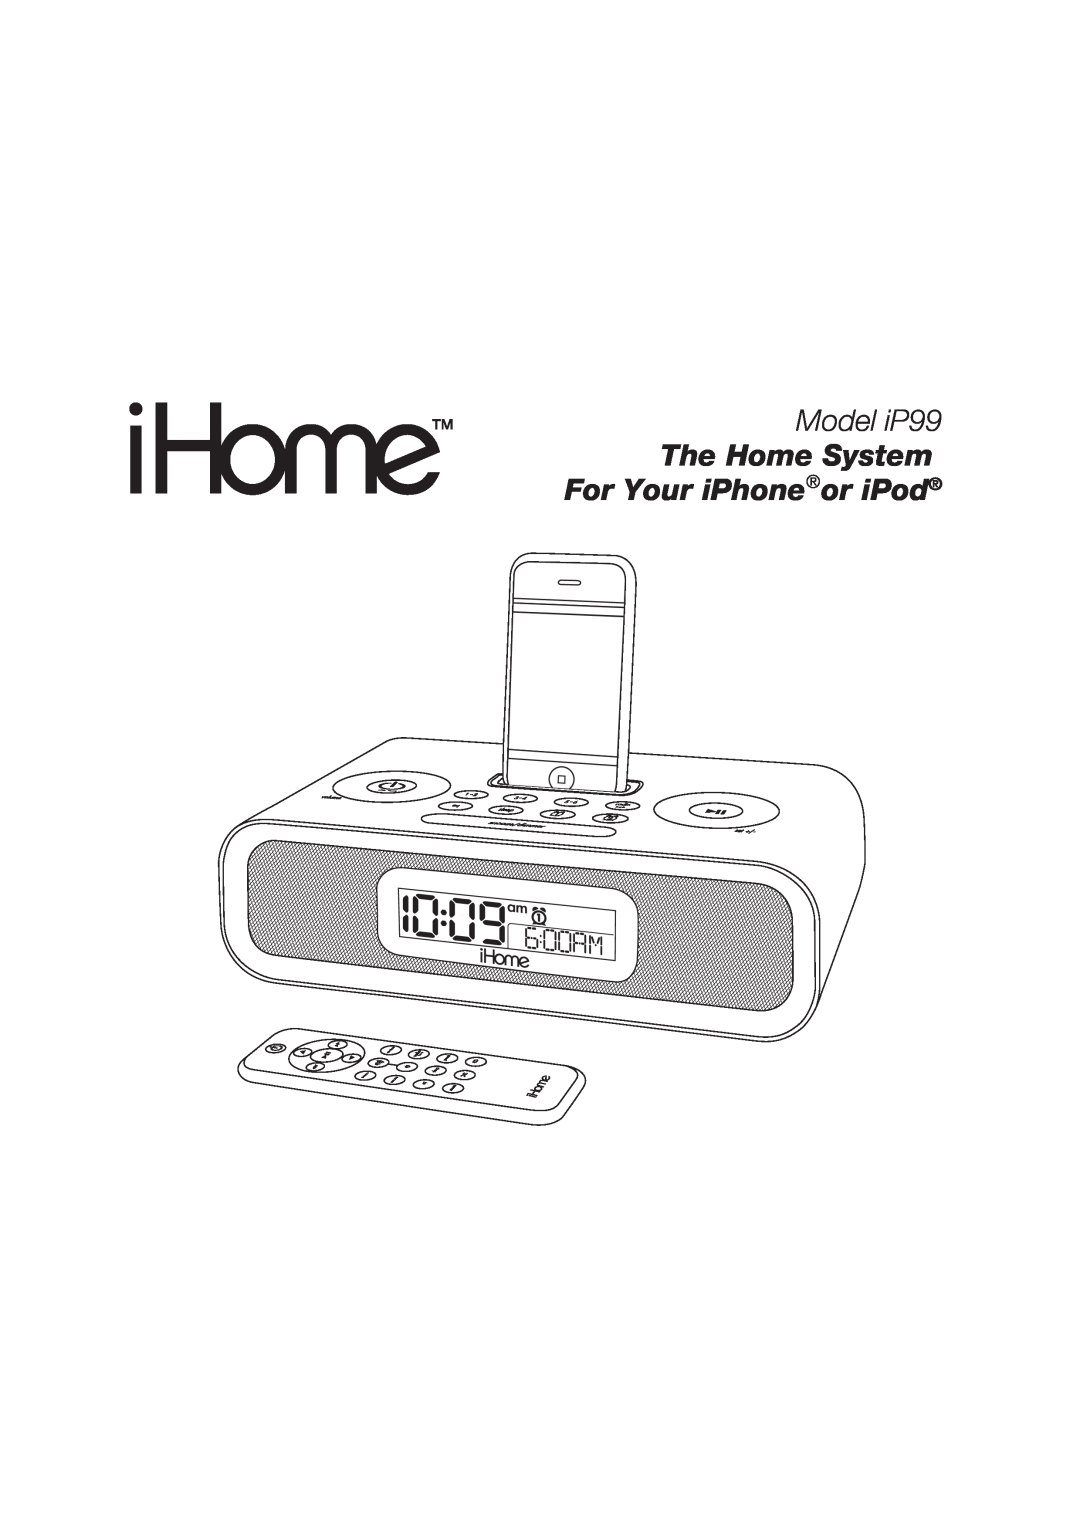 iHome manual Model iP99, The Home System For Your iPhoneor iPod 